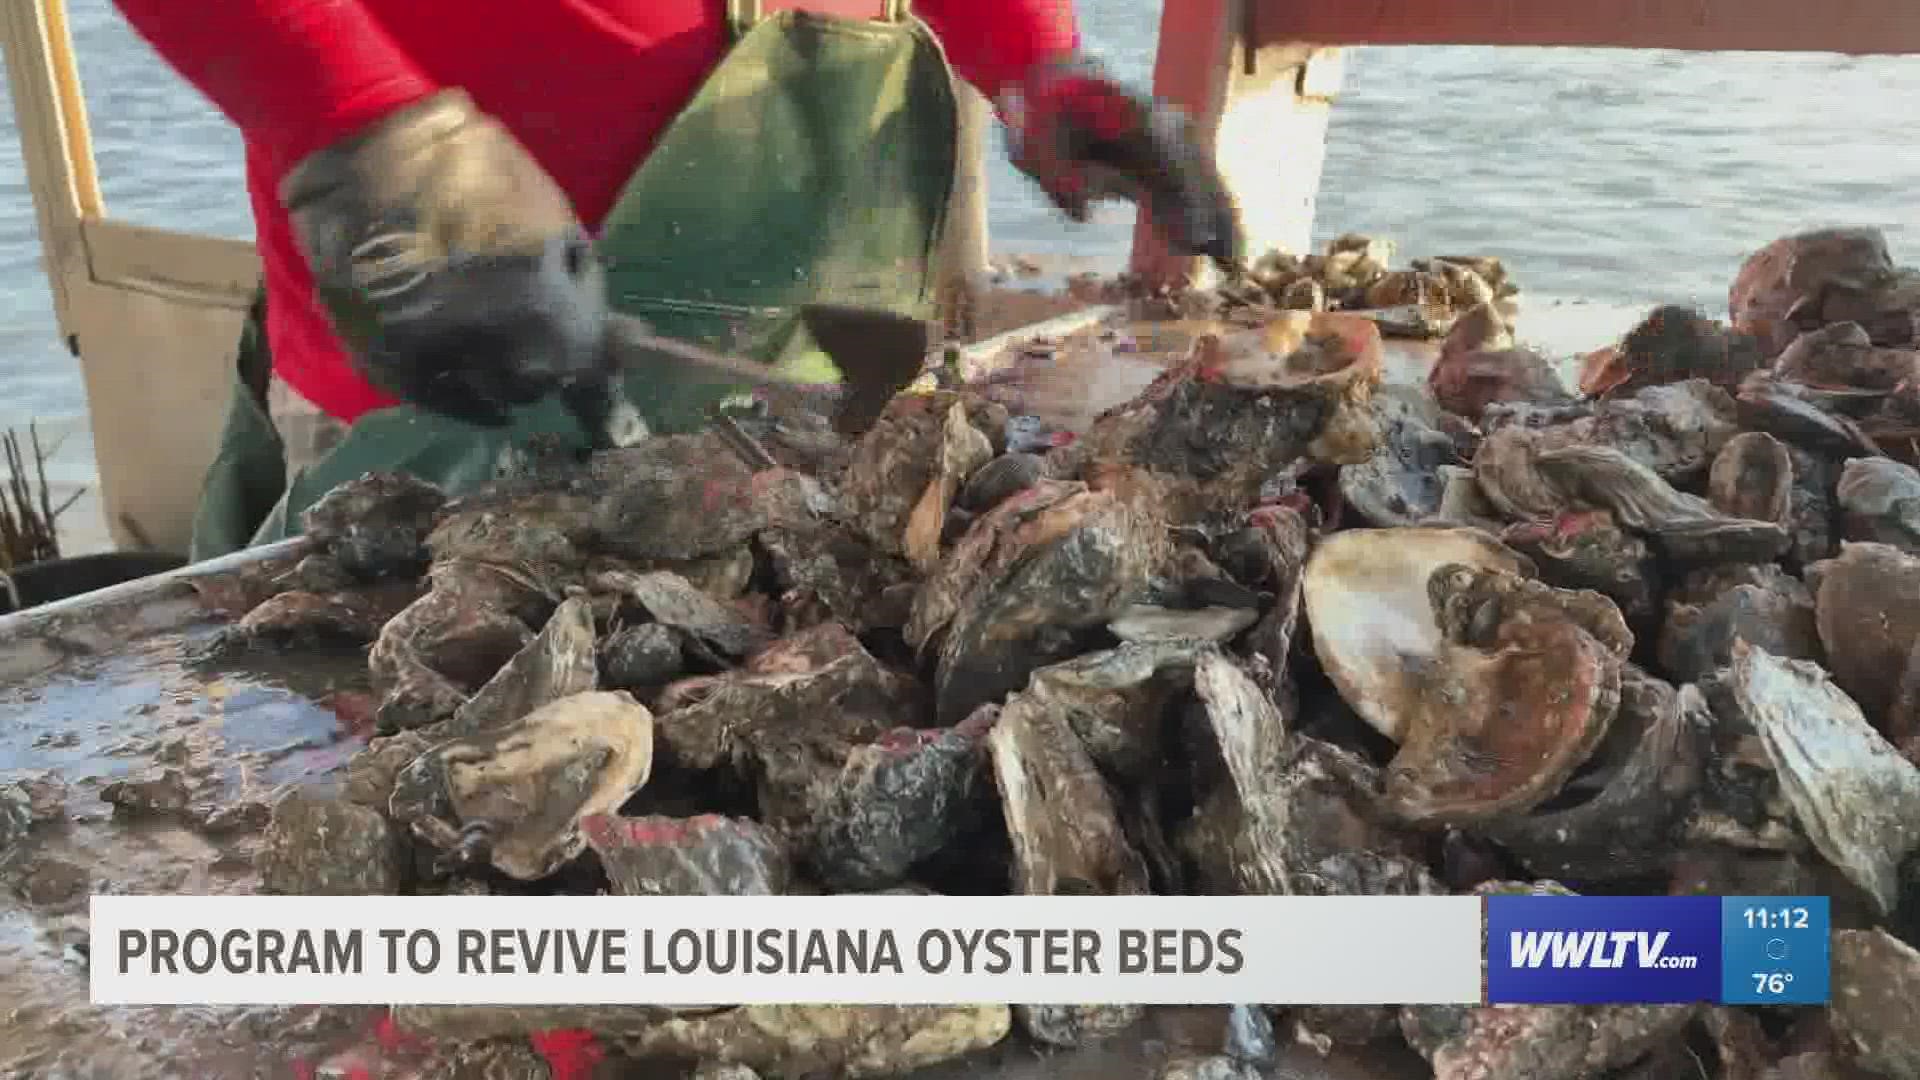 Hurricane Ida the latest blow to Louisiana's oyster industry